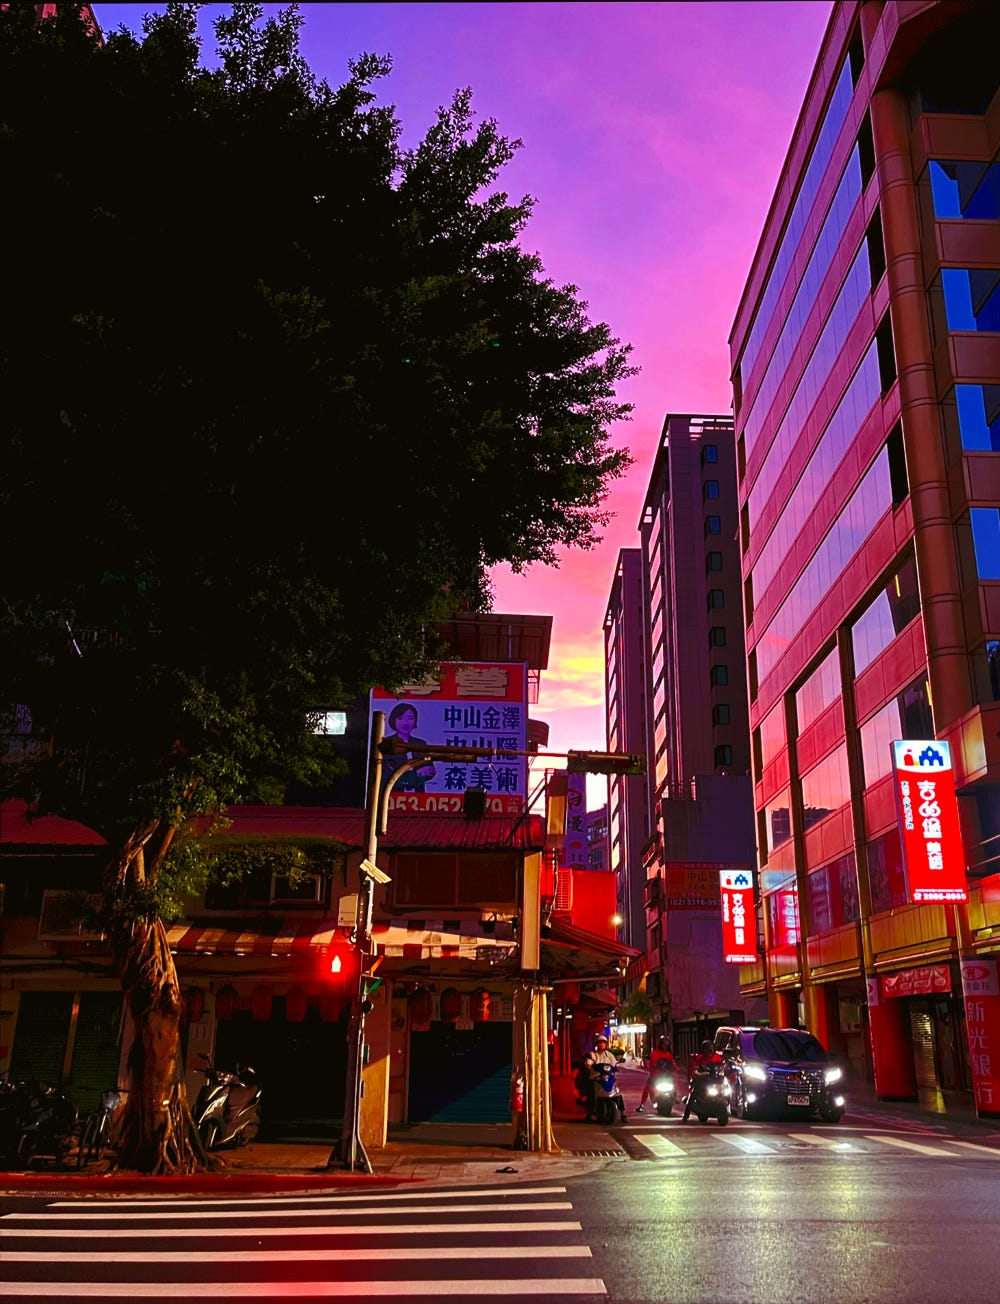 A bright pink and purple sunset seen behind the high rise buildings of Taipei's Zhongshan district